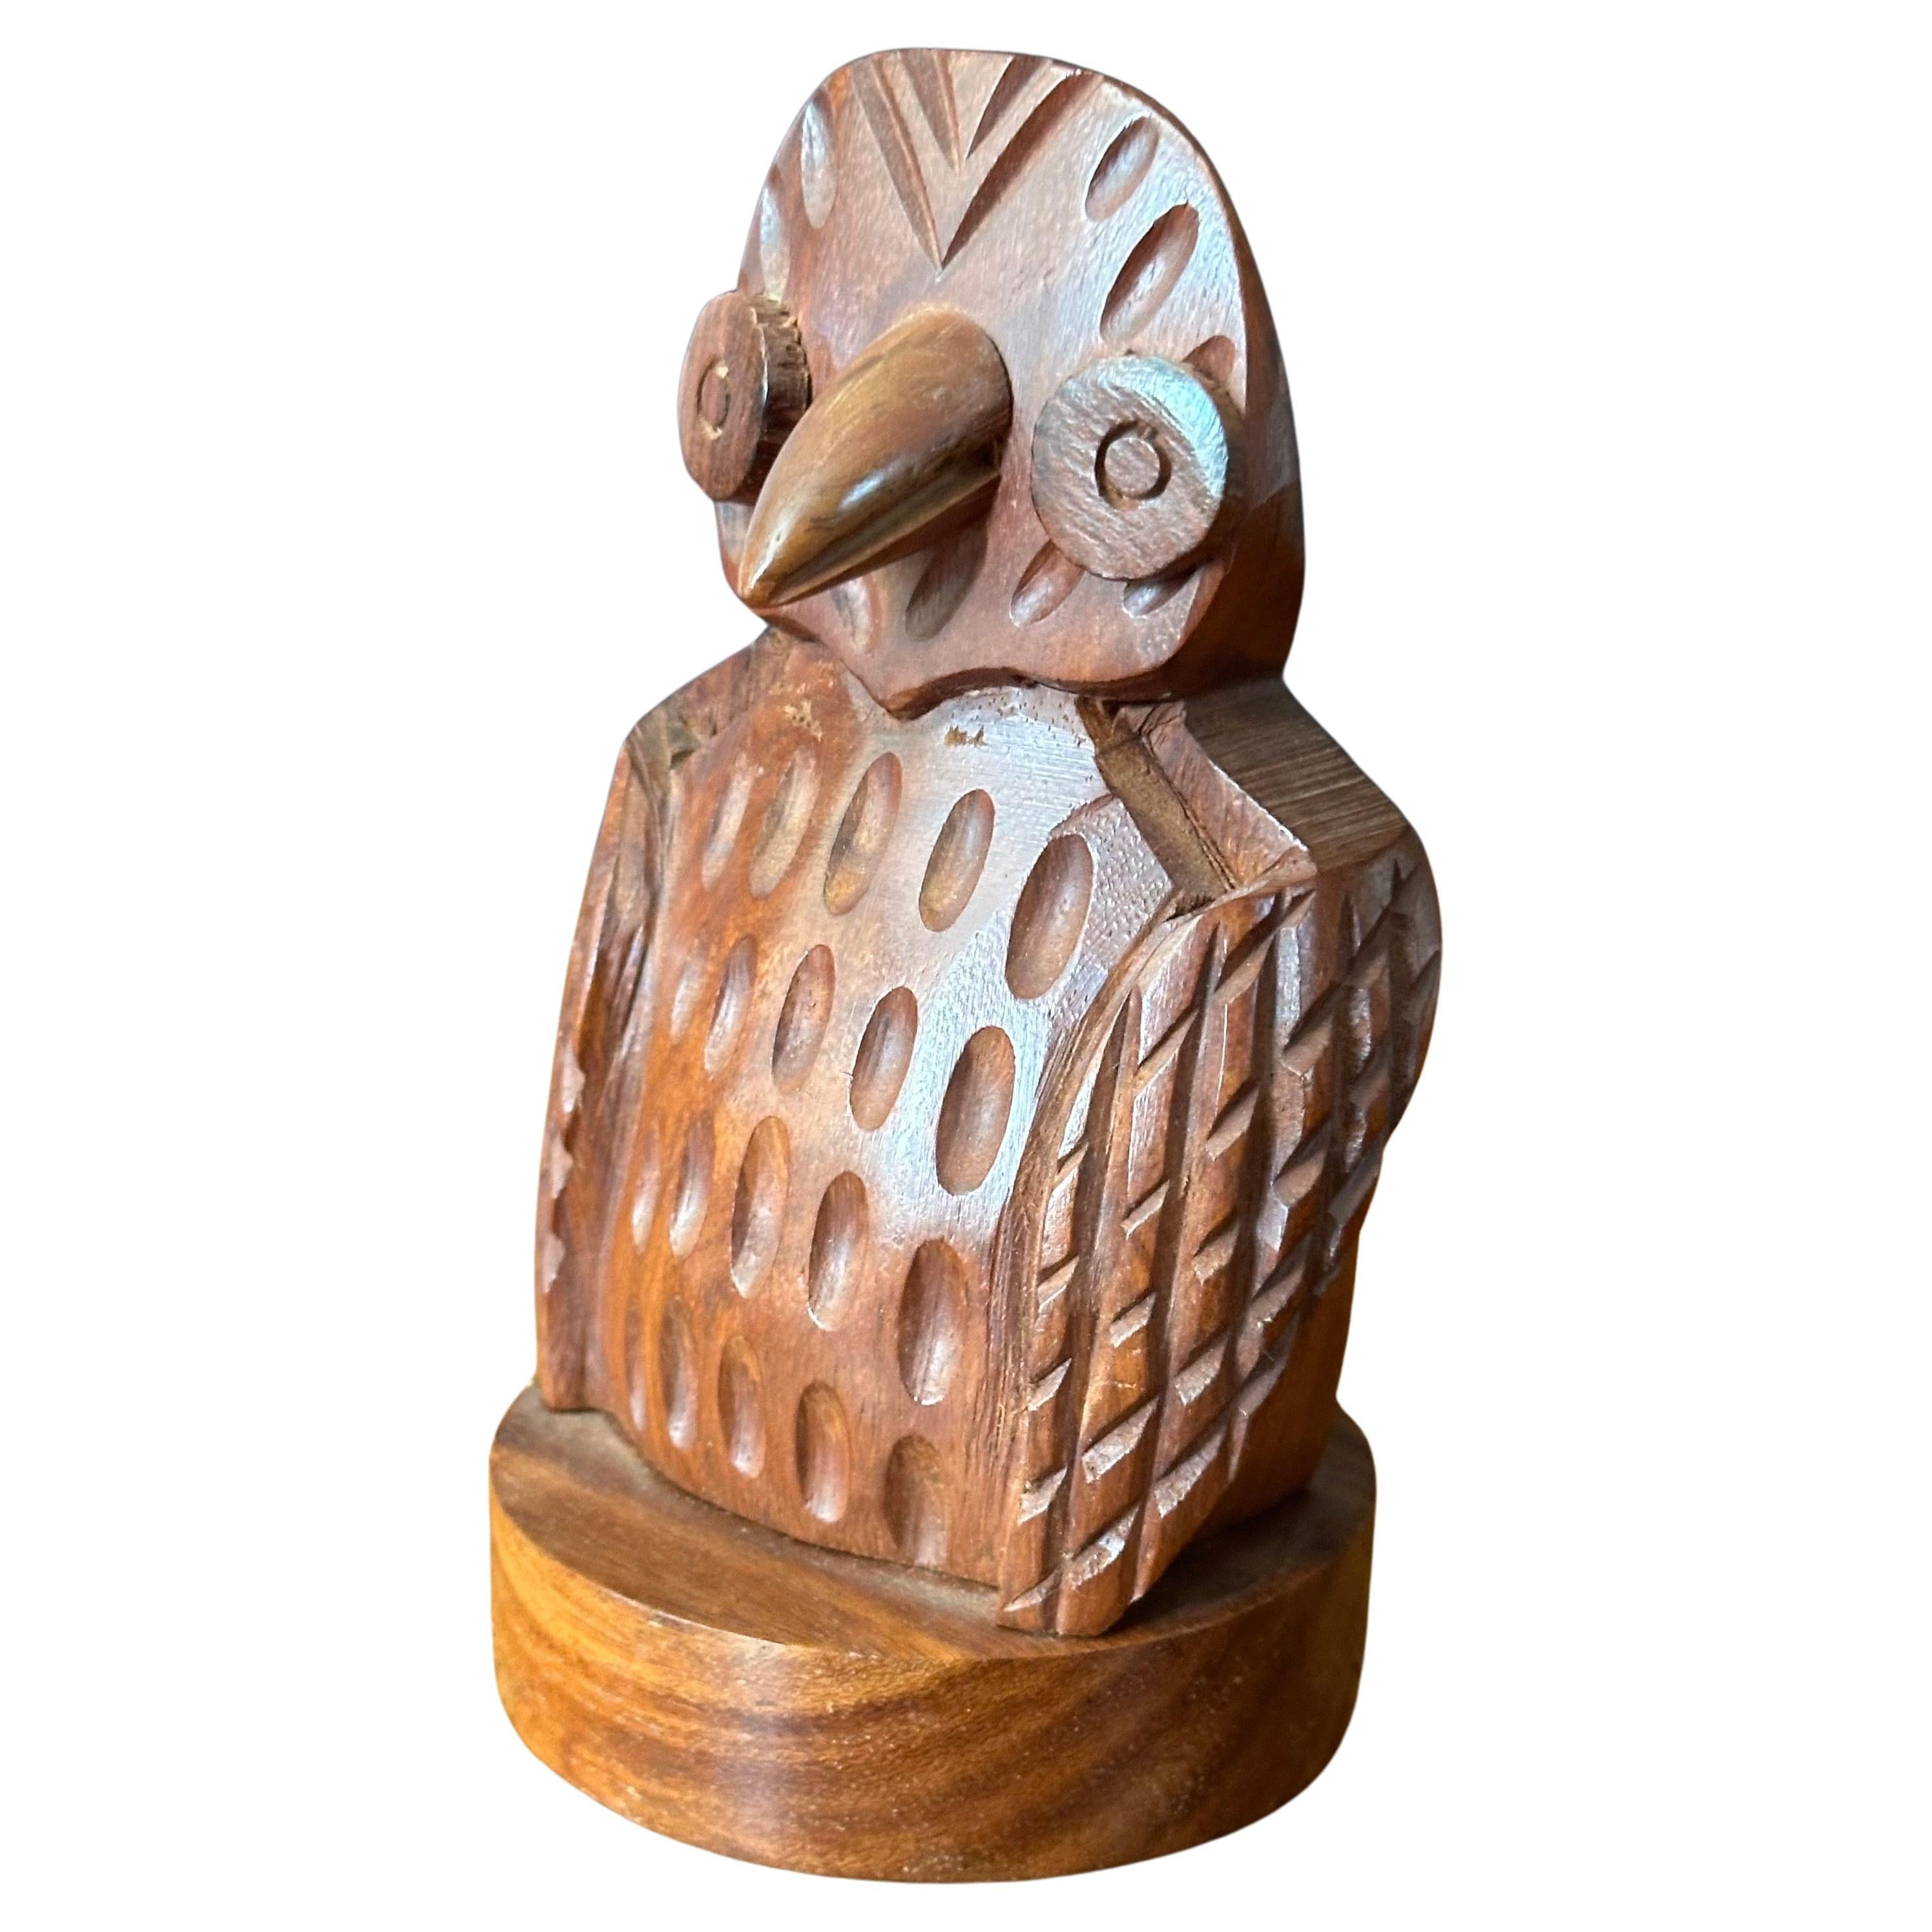 A hand-crafted mahogany wood owl letter holder / sculpture, circa 1970s. The piece is in very good vintage condition with no chips or cracks and measures 3